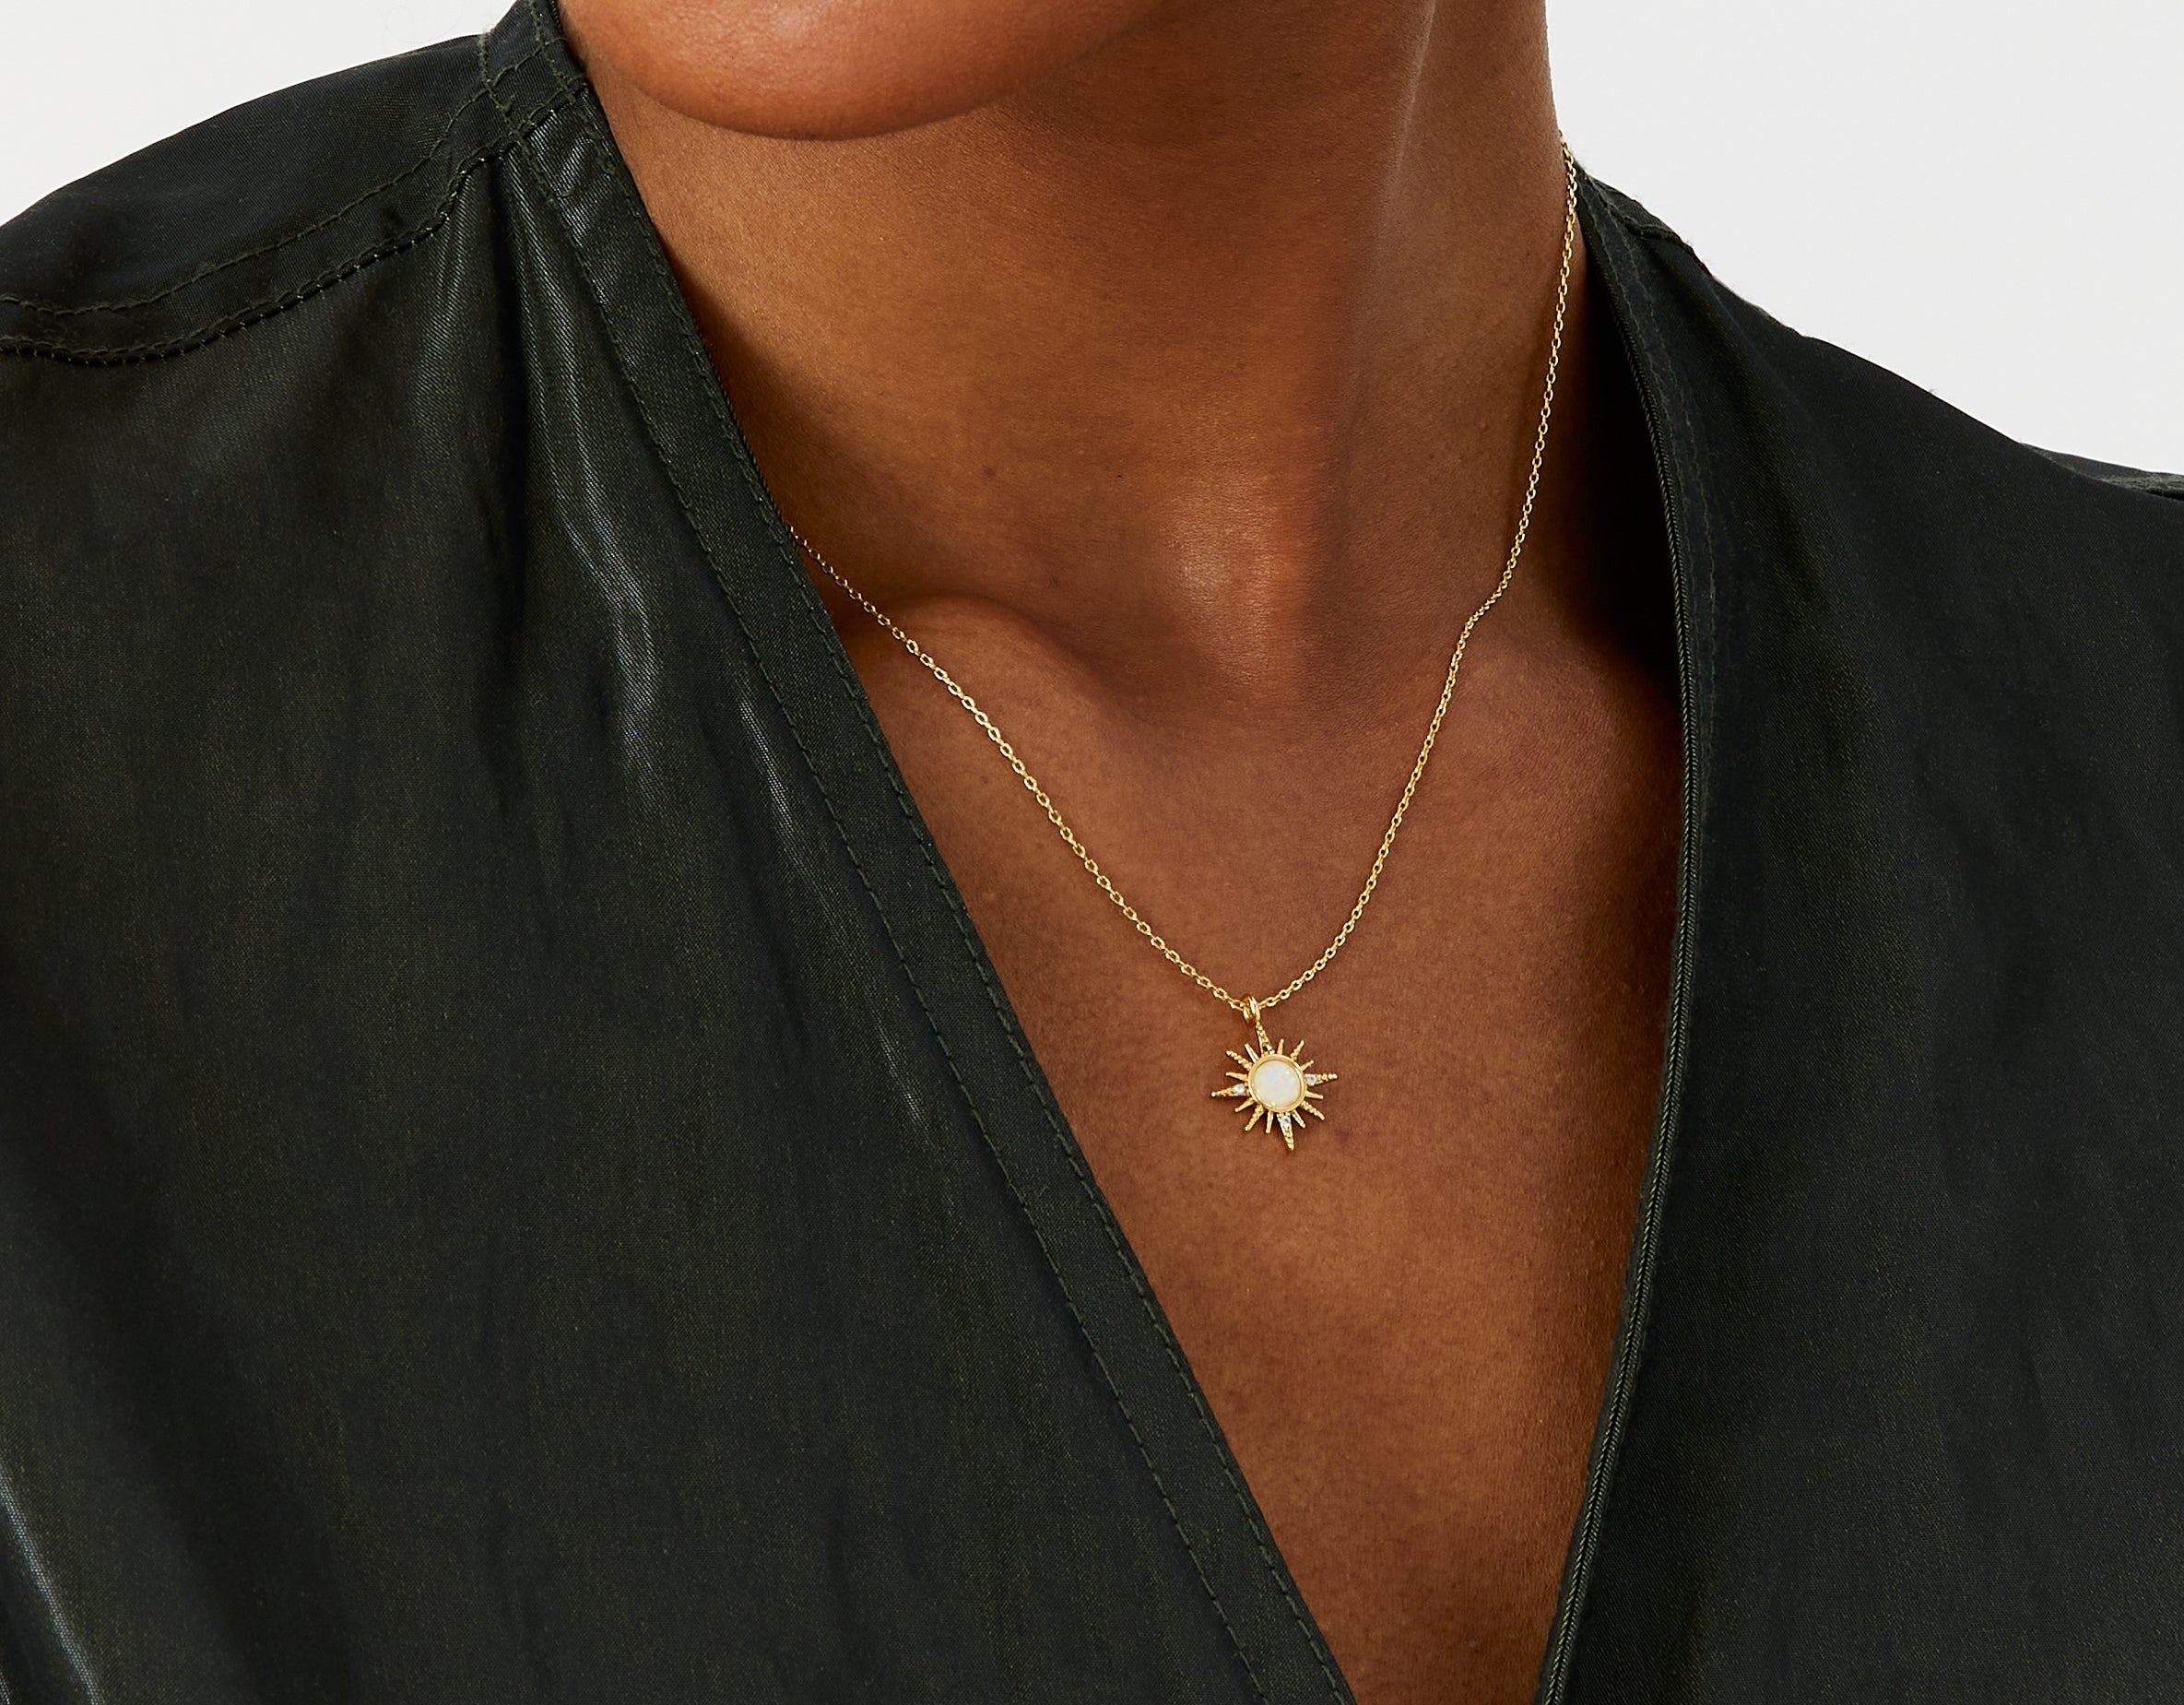 Real Gold Plated Opal Starburst Pendant Necklace For Women By Accessorize London